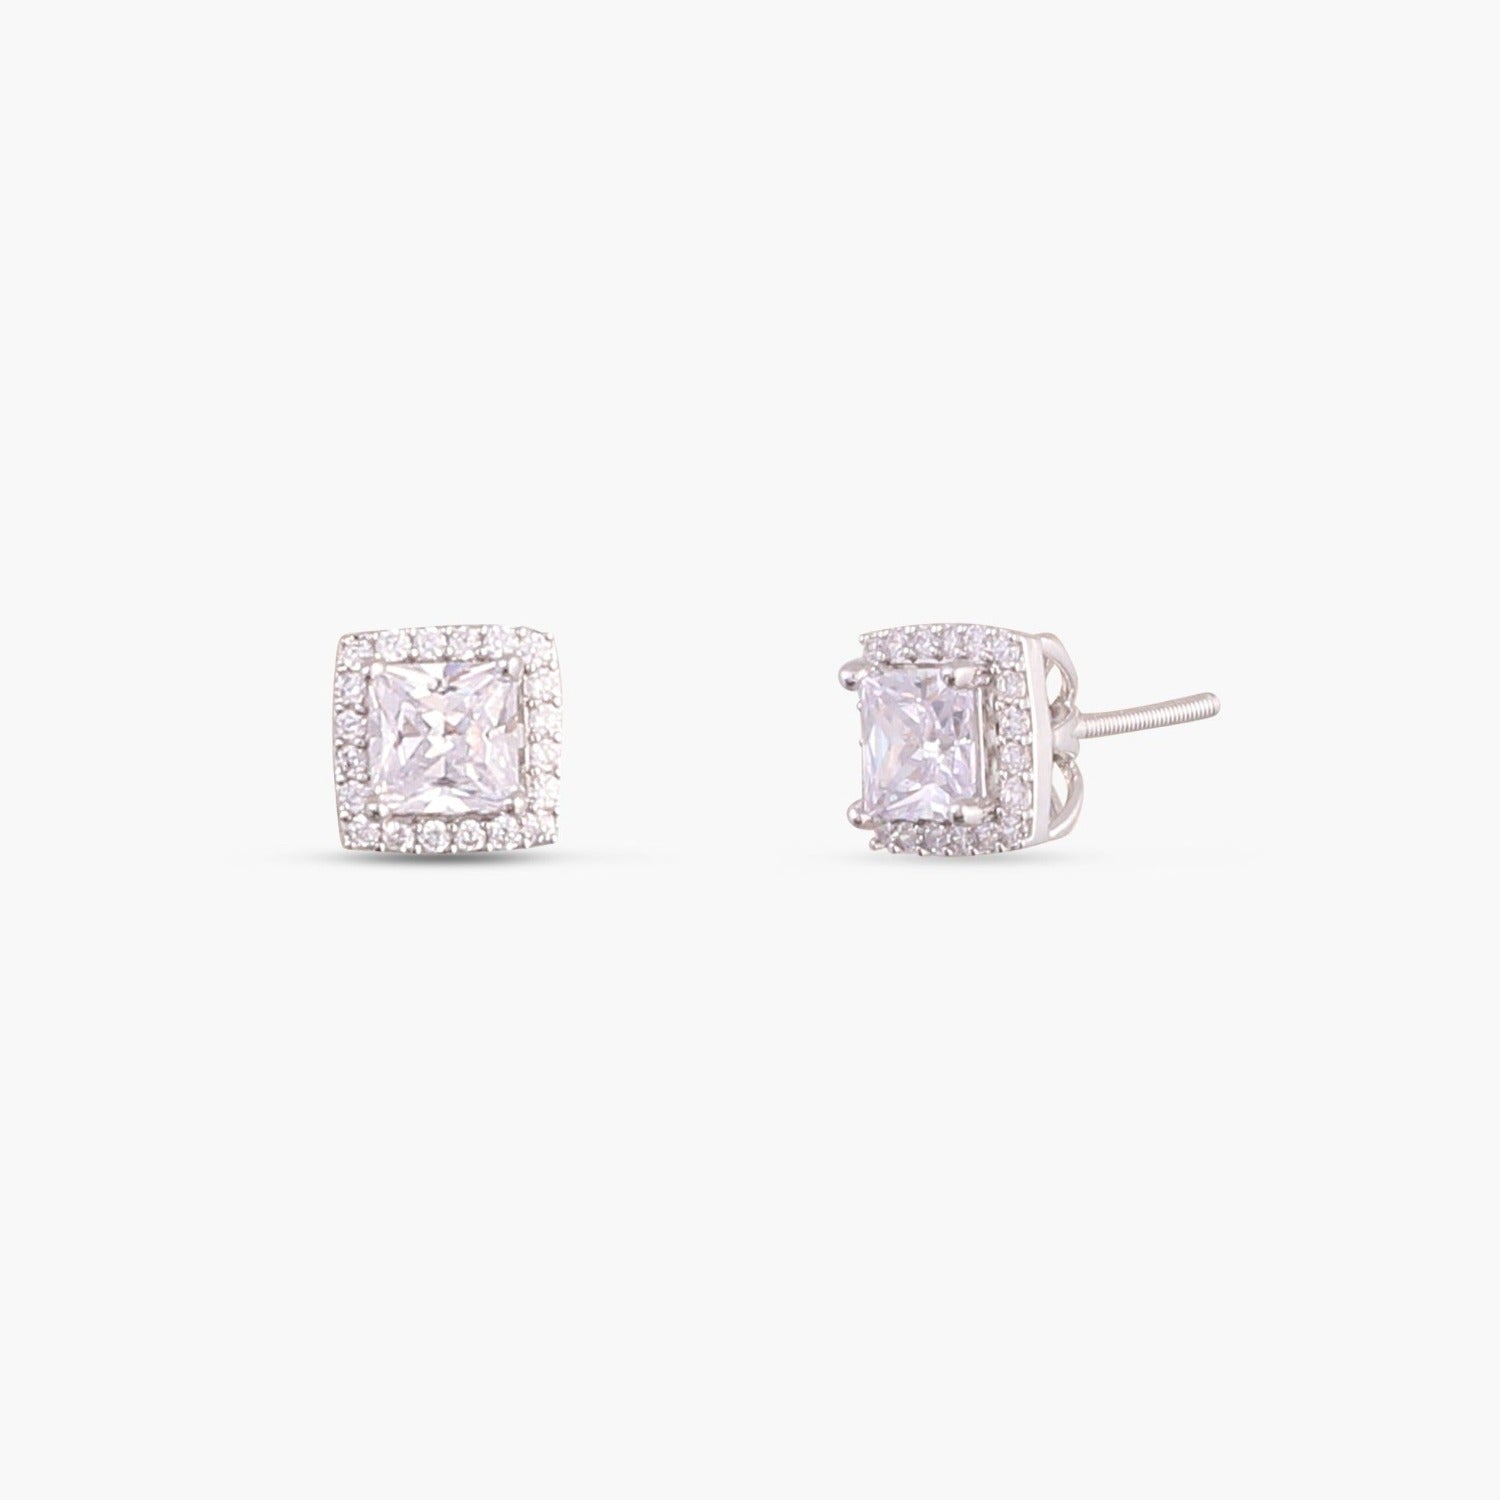 Classic Princess Cut CZ Solitaire and Halo Ear jacket Silver Stud Earrings